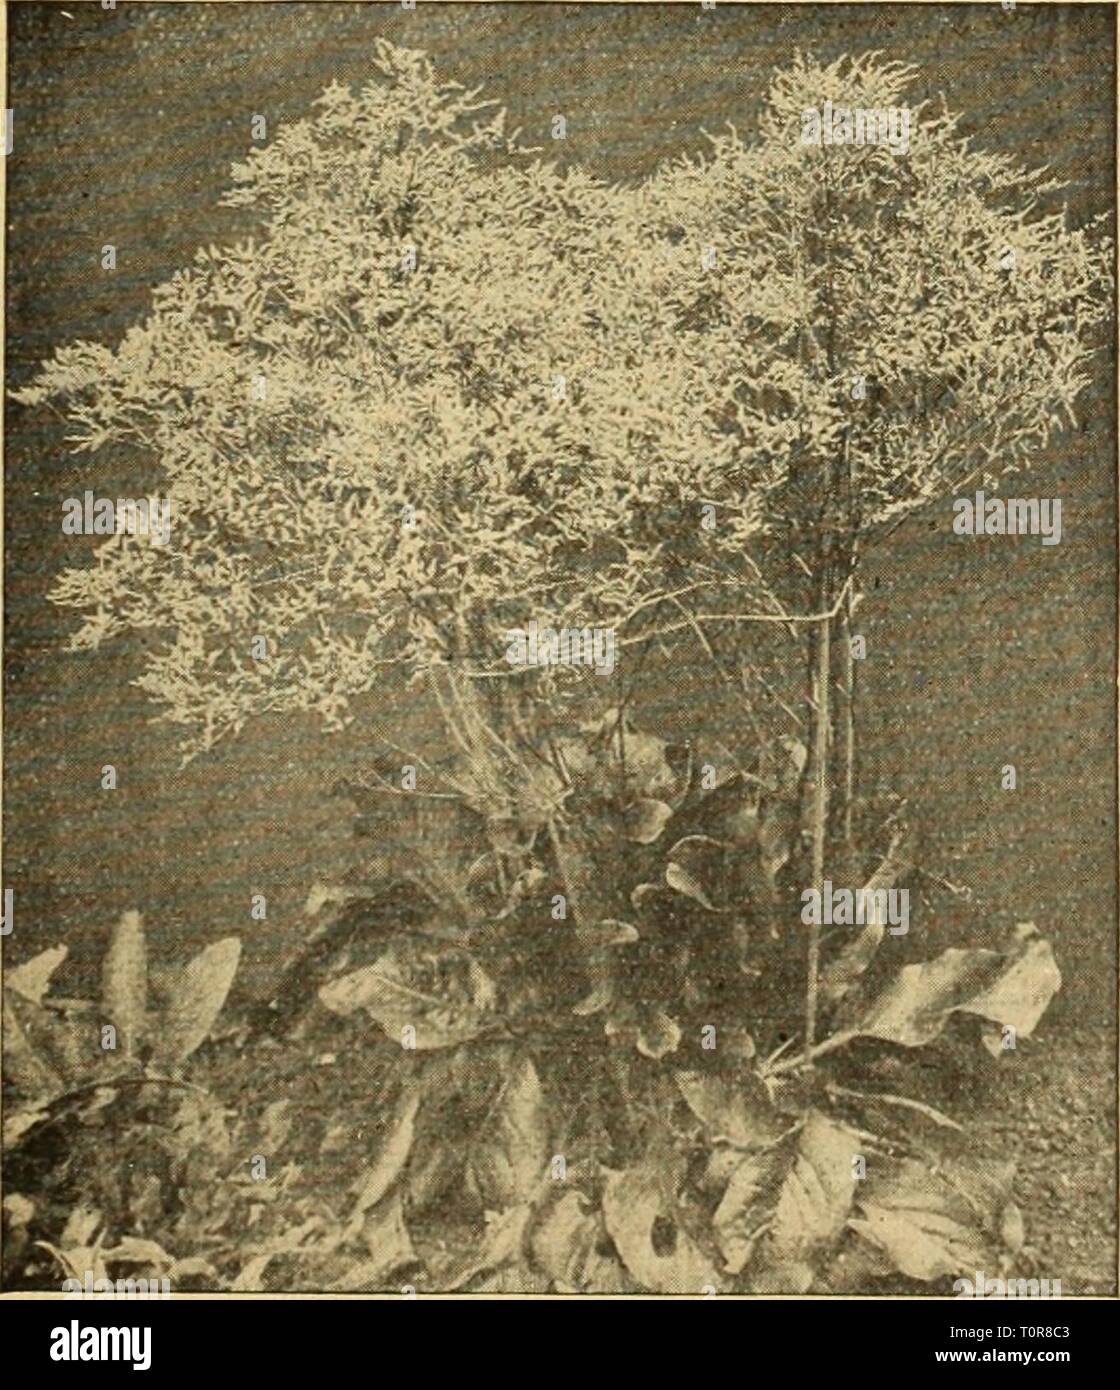 Dreer's autumn catalogue 1926 (1926) Dreer's autumn catalogue 1926  dreersautumncata1926henr Year: 1926  Salvia Piicheri (Offered on page 46)    Statice Latifolia, Elegantissinl StachyS (Woundwort) Betonica Grandiflora {Betony). Large flowers of purpHsh- rose; June and July; 15 inches. 25 cts. each; $2.50 per doz. Statice (Great Sea Lavender) Latifolia. Immense candelabra-like heads of purplish-blue minute flowers during July and August. 25 cts. each; $2.50 per doz.; $15.00 per 100. Latifolia Elegantissima. A new improved form with not only larger individual flowers but also with much larger  Stock Photo